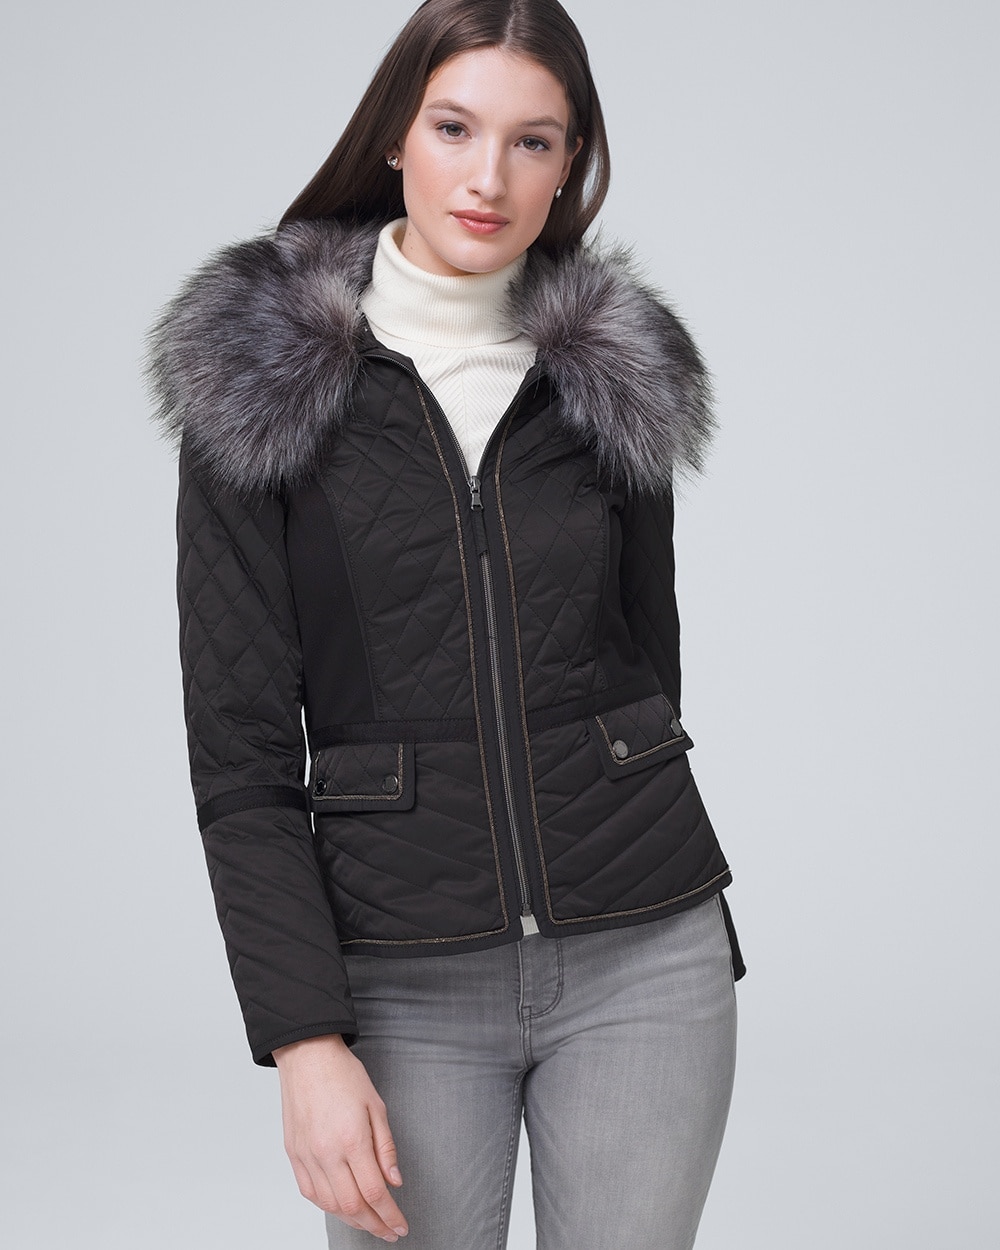 Women's Removable Faux Fur Collar Zip Up Puffer Jacket